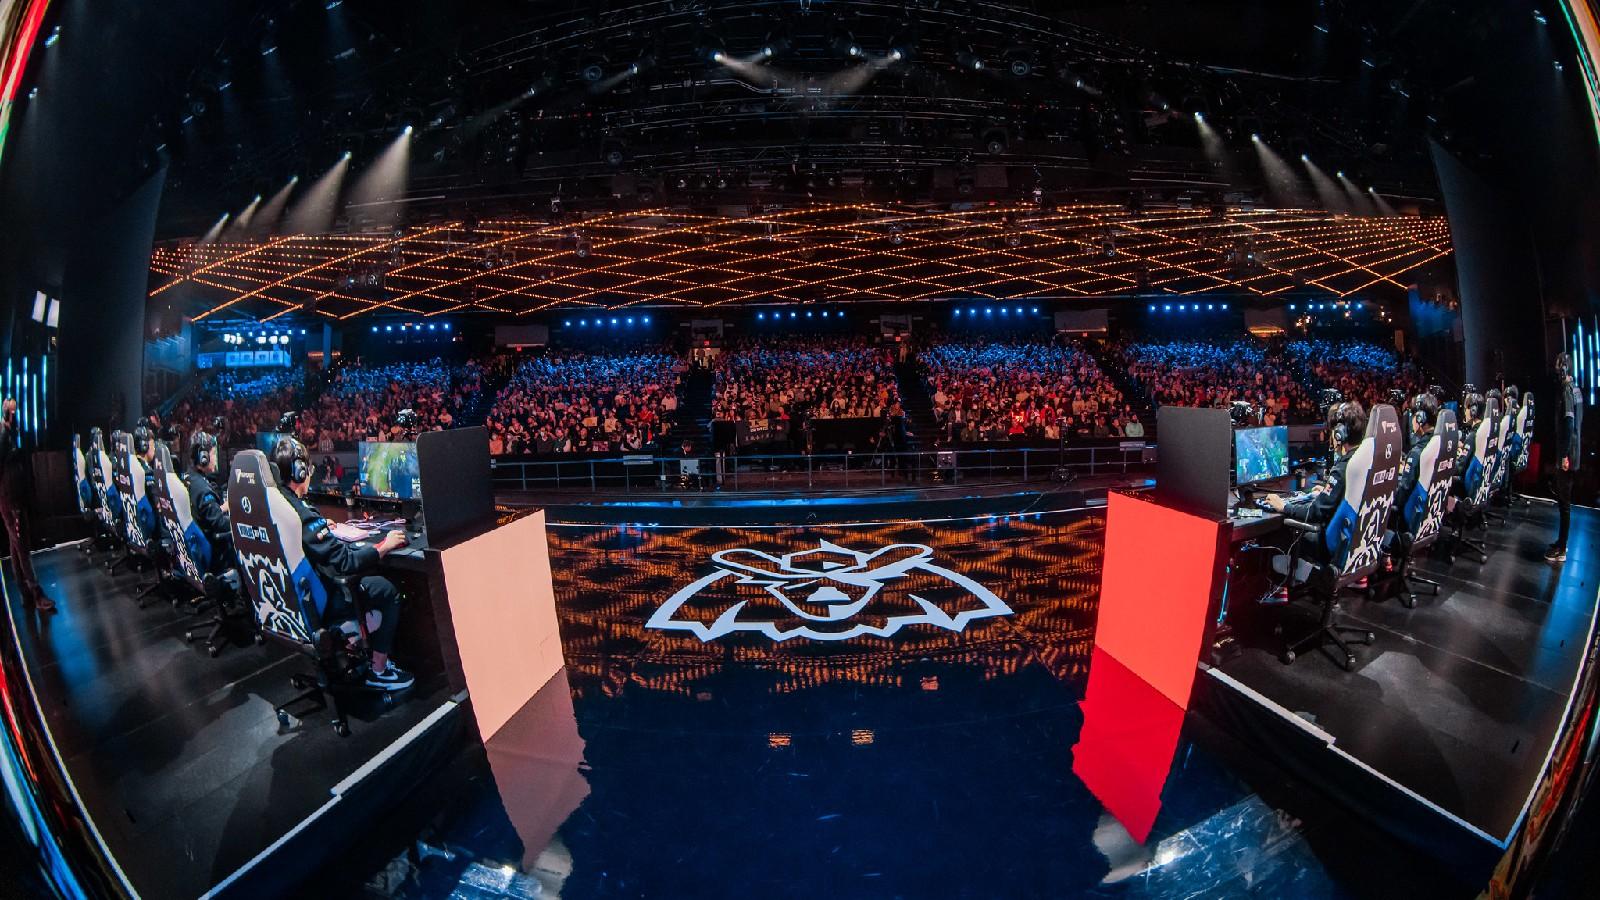 League of Legends Worlds Draw: Groups Announced for Worlds 2022